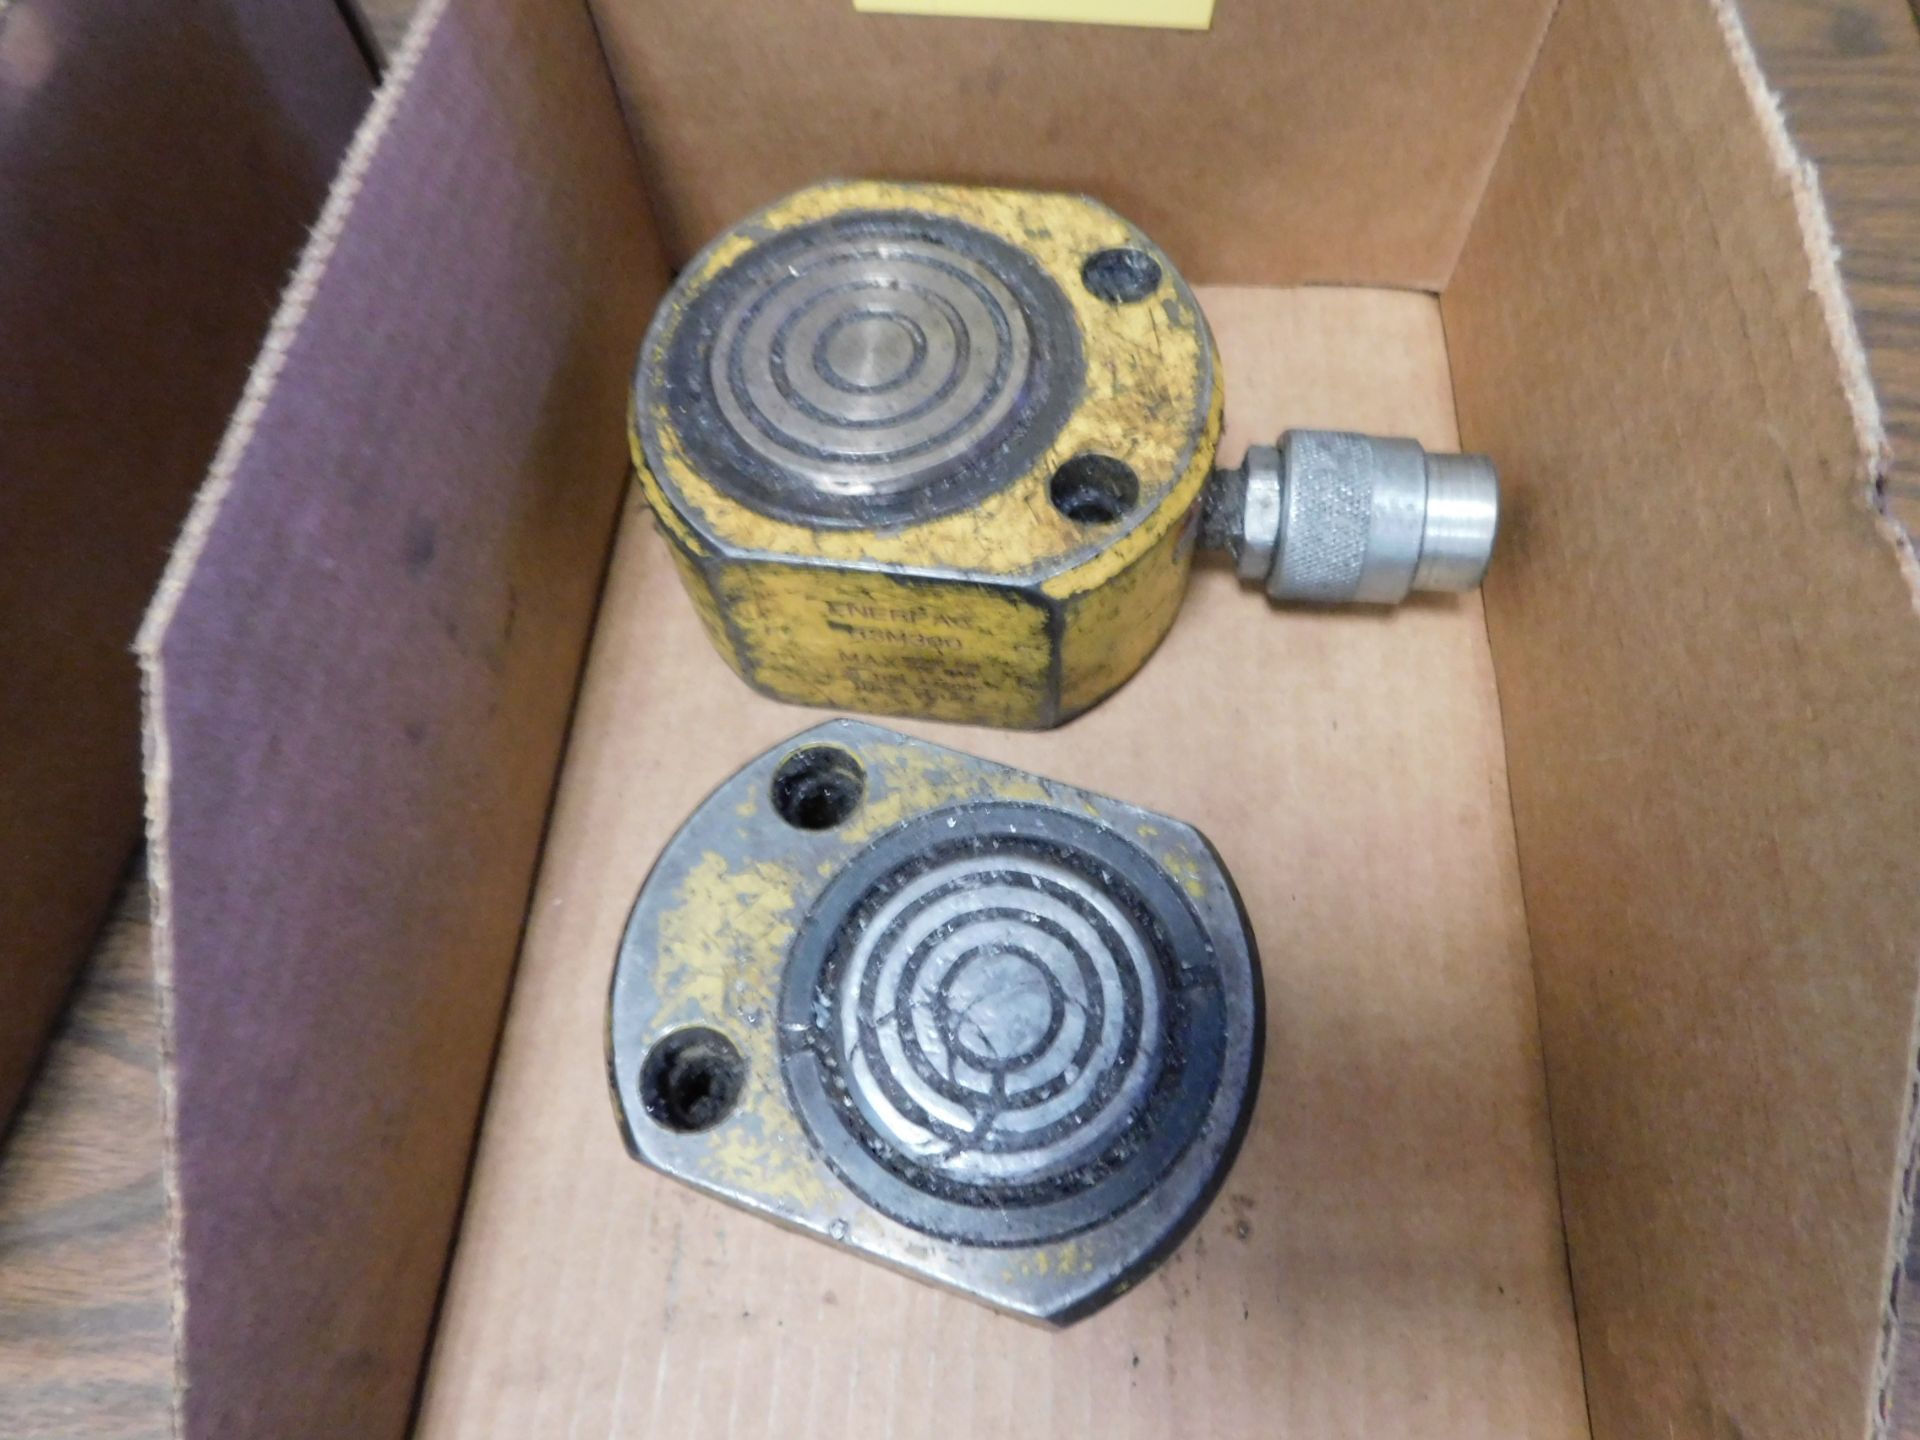 (2) Enerpac Pancake Hydraulic Cylinders, (1) 20 Ton and (1) 30 Ton